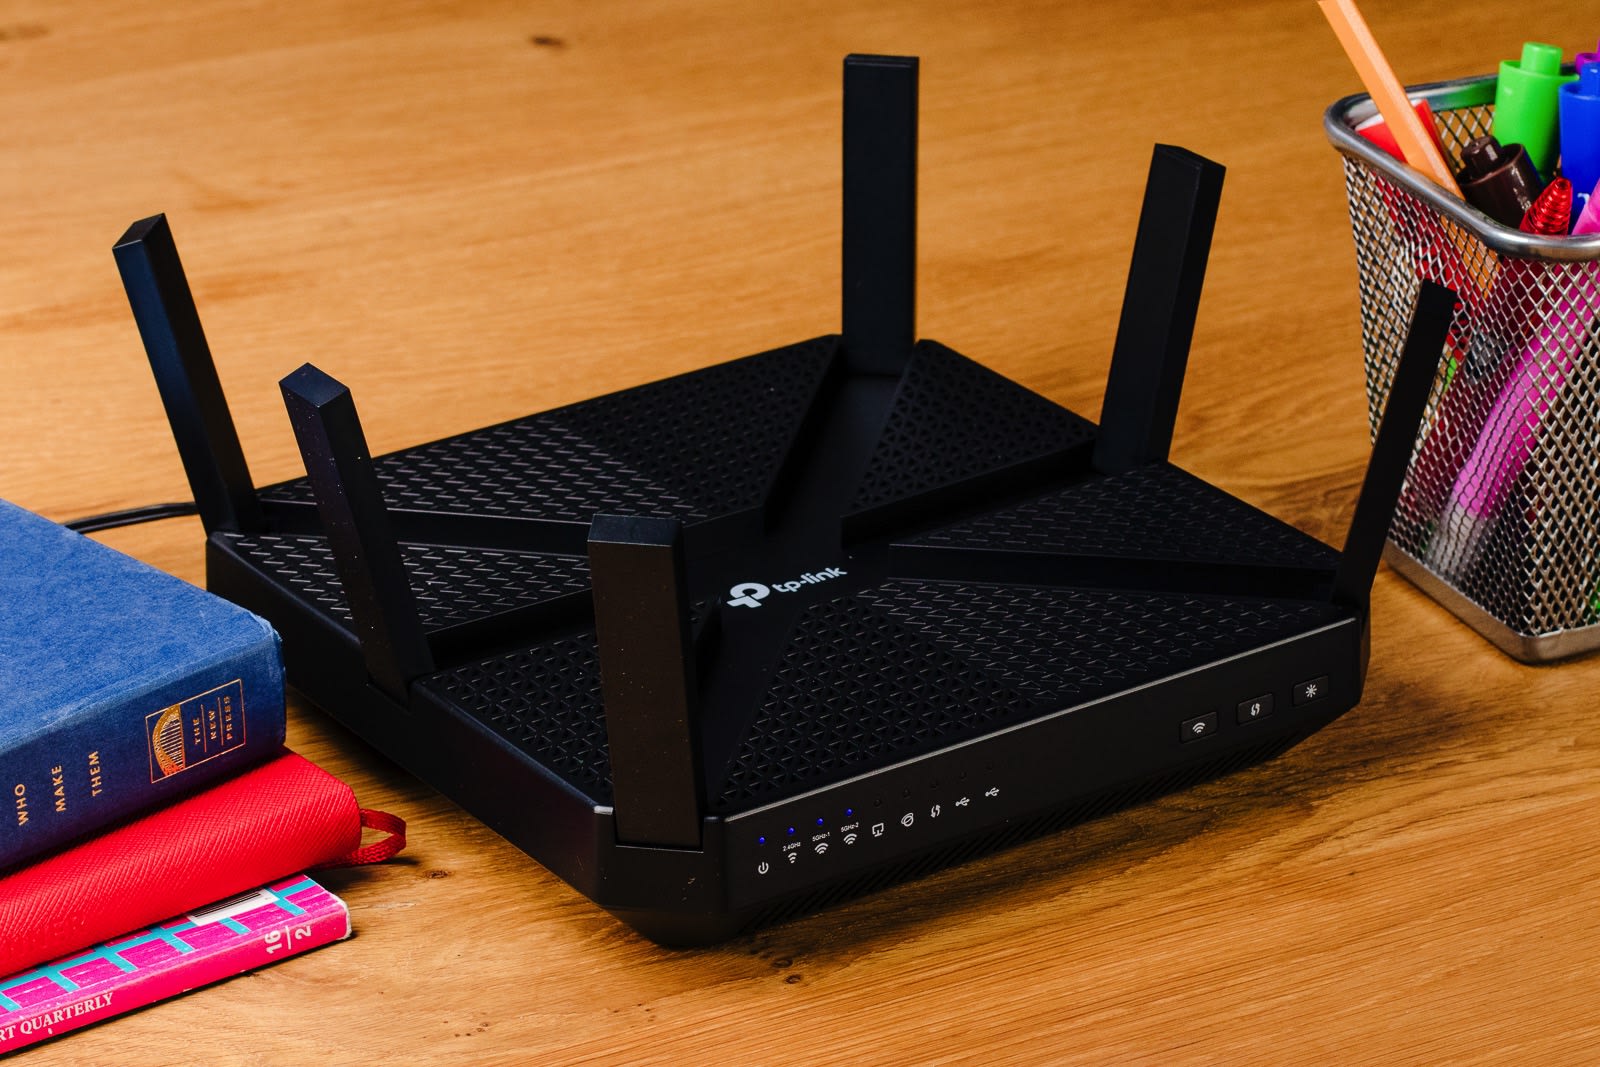 inkt Bad prins The best WiFi router | Engadget